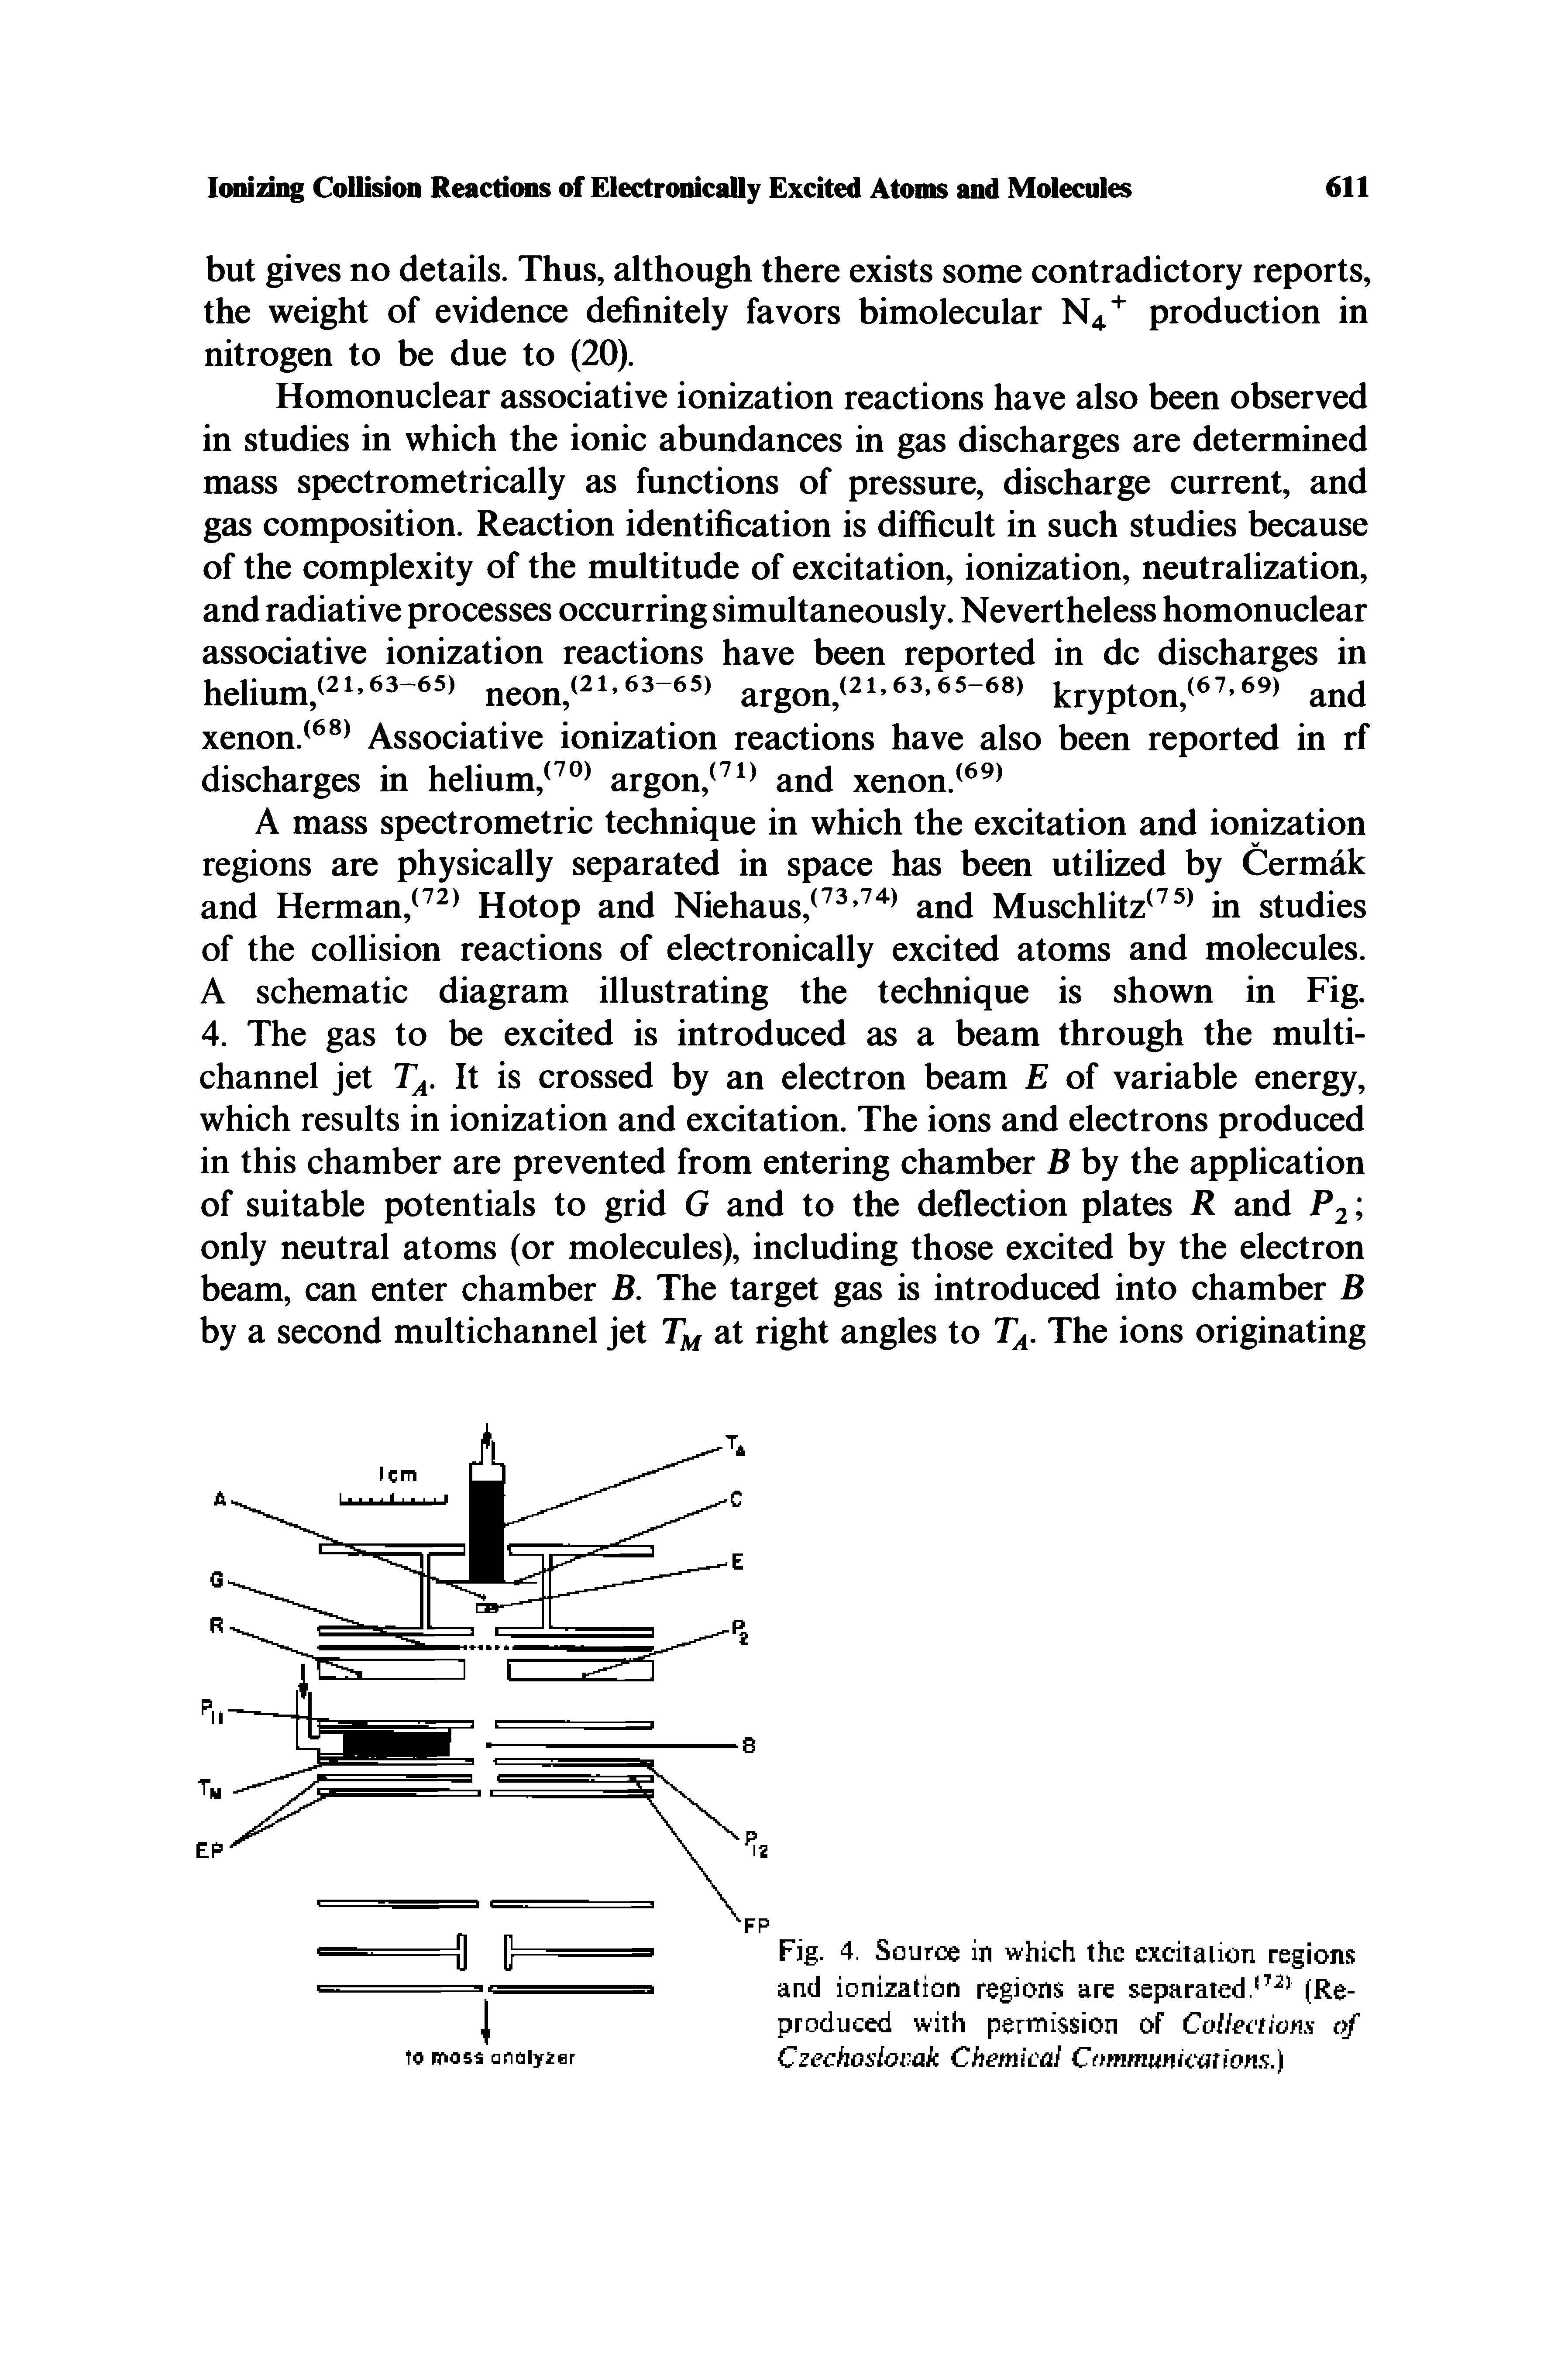 Fig. 4. Source in which the excitation regions and ionization regions are separated. (Reproduced with permission of Collections of Czechoslovak Chemical Communications.)...